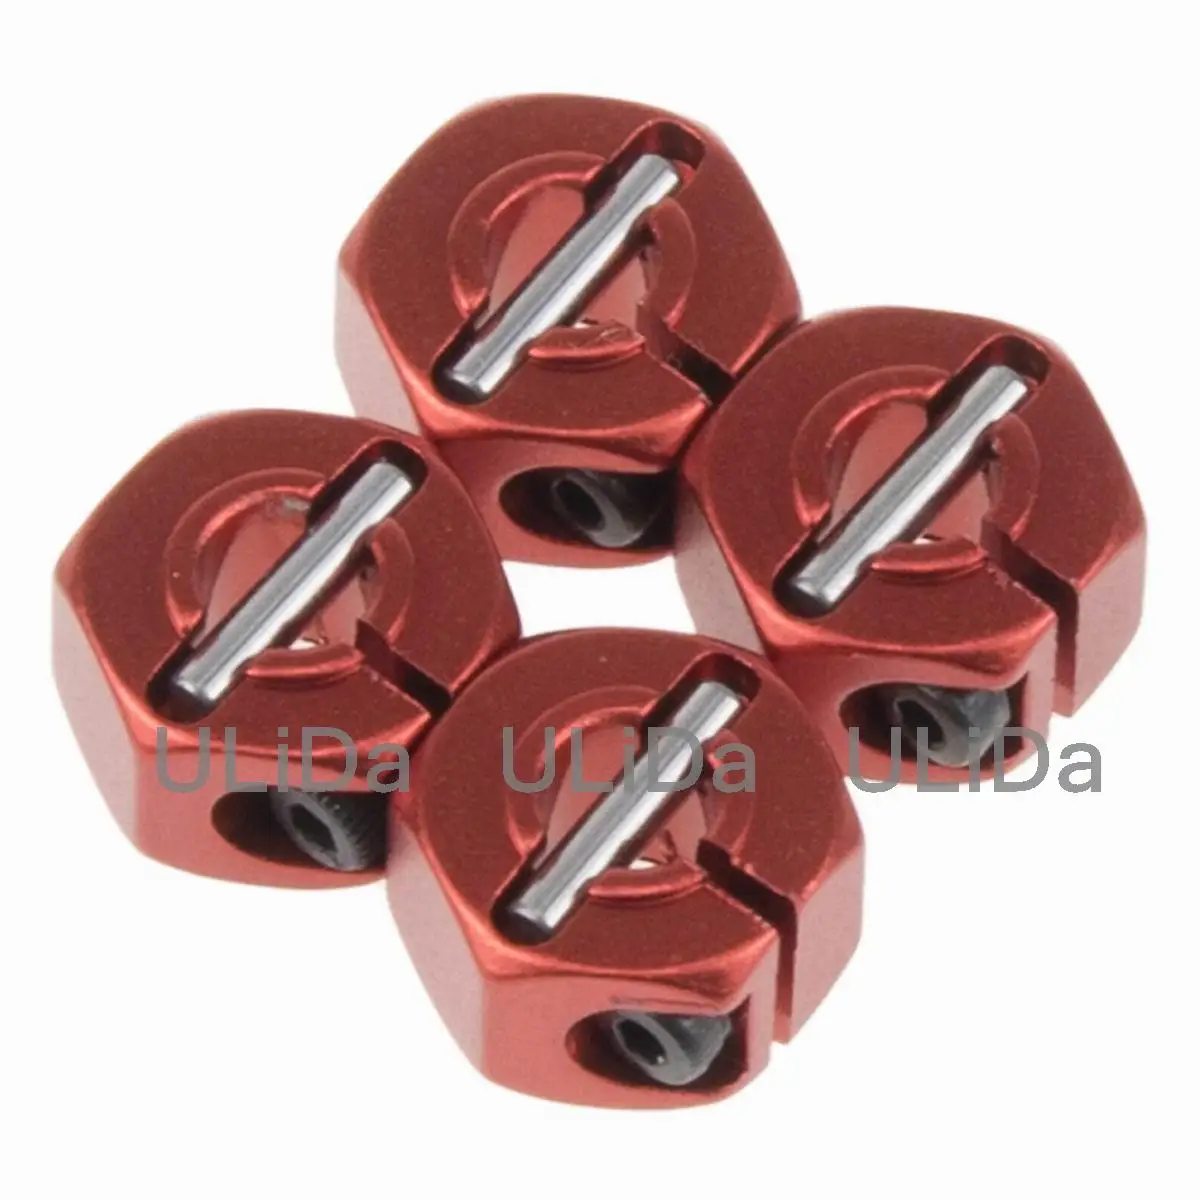 4pcs 12mm Hex 7mm Thickness 5mm Hole Metal Tire Wheel Hub Drive Adapter Mount for 1/10 RC Car Model Hsp Redcat Exceed Tyre Part